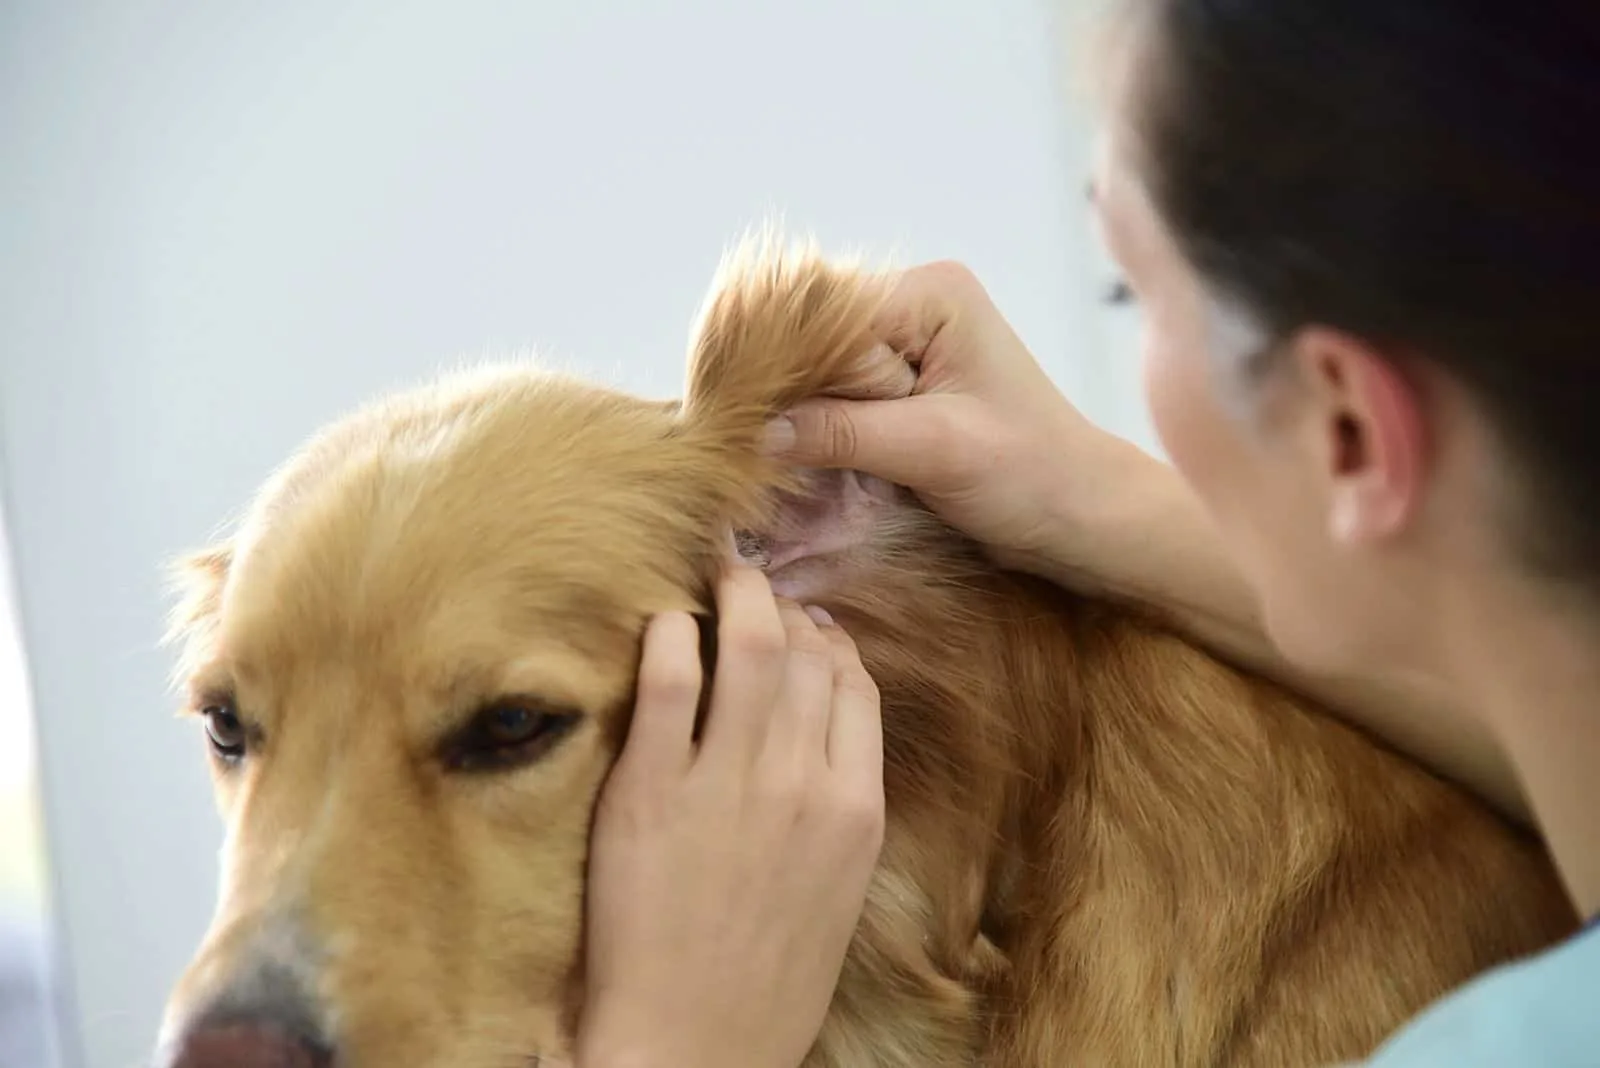 the woman examines the dog's ear